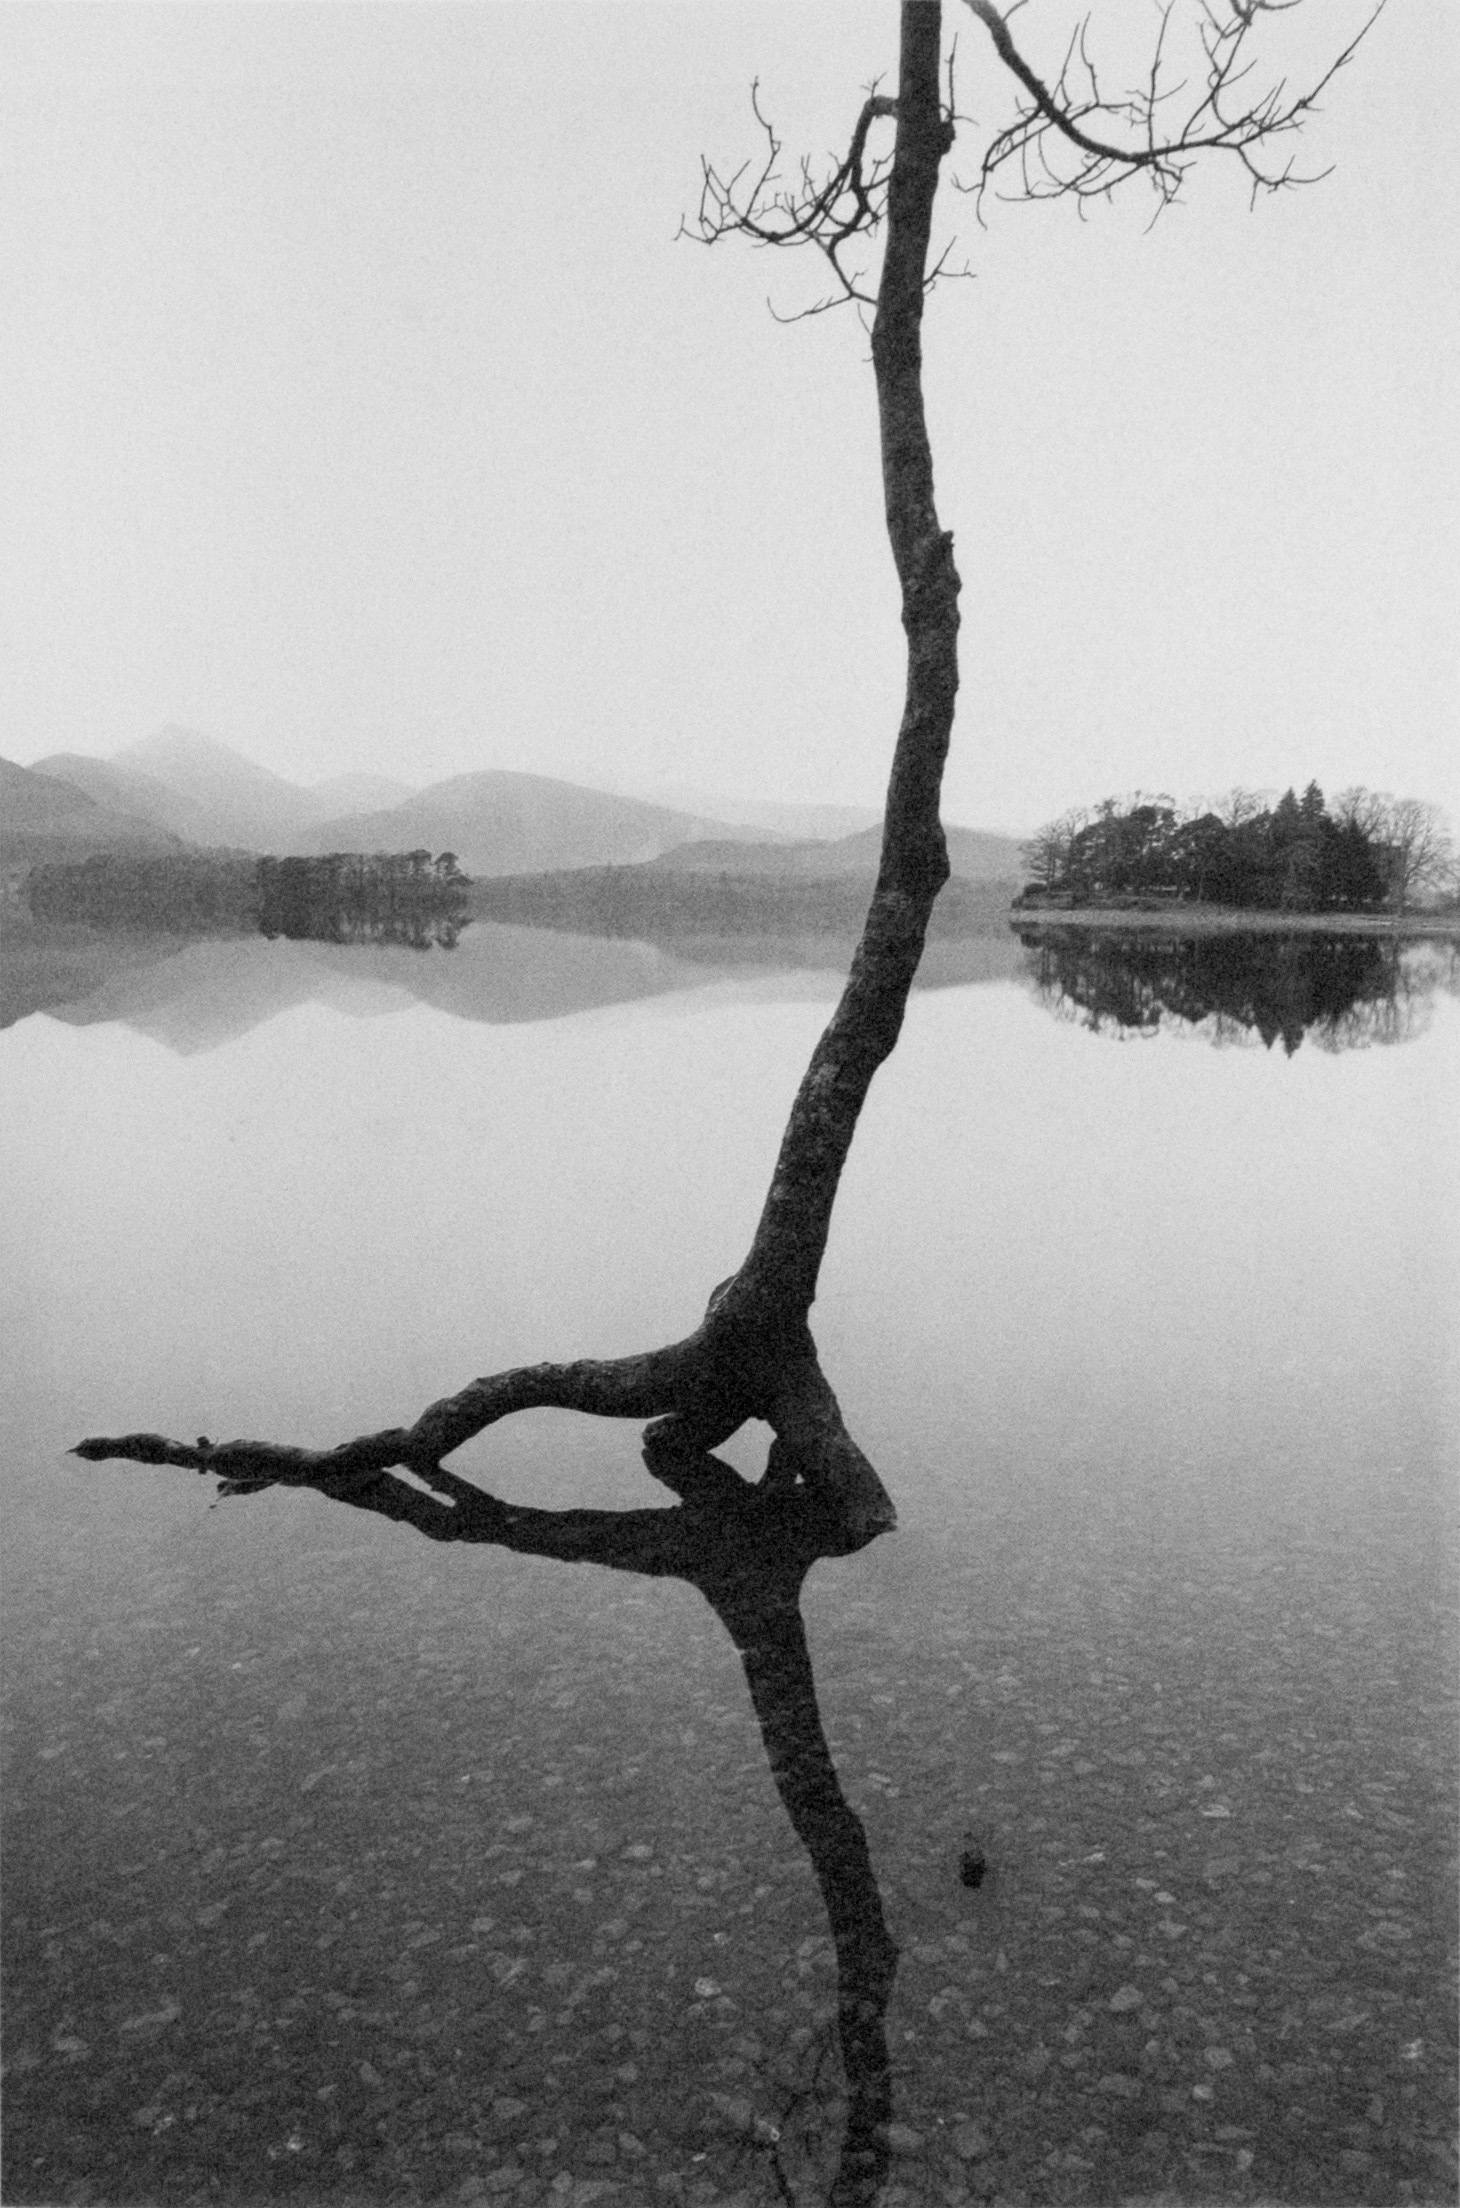 Flooded tree, Derwentwater, 1981, Fay Godwin © The British Library Board